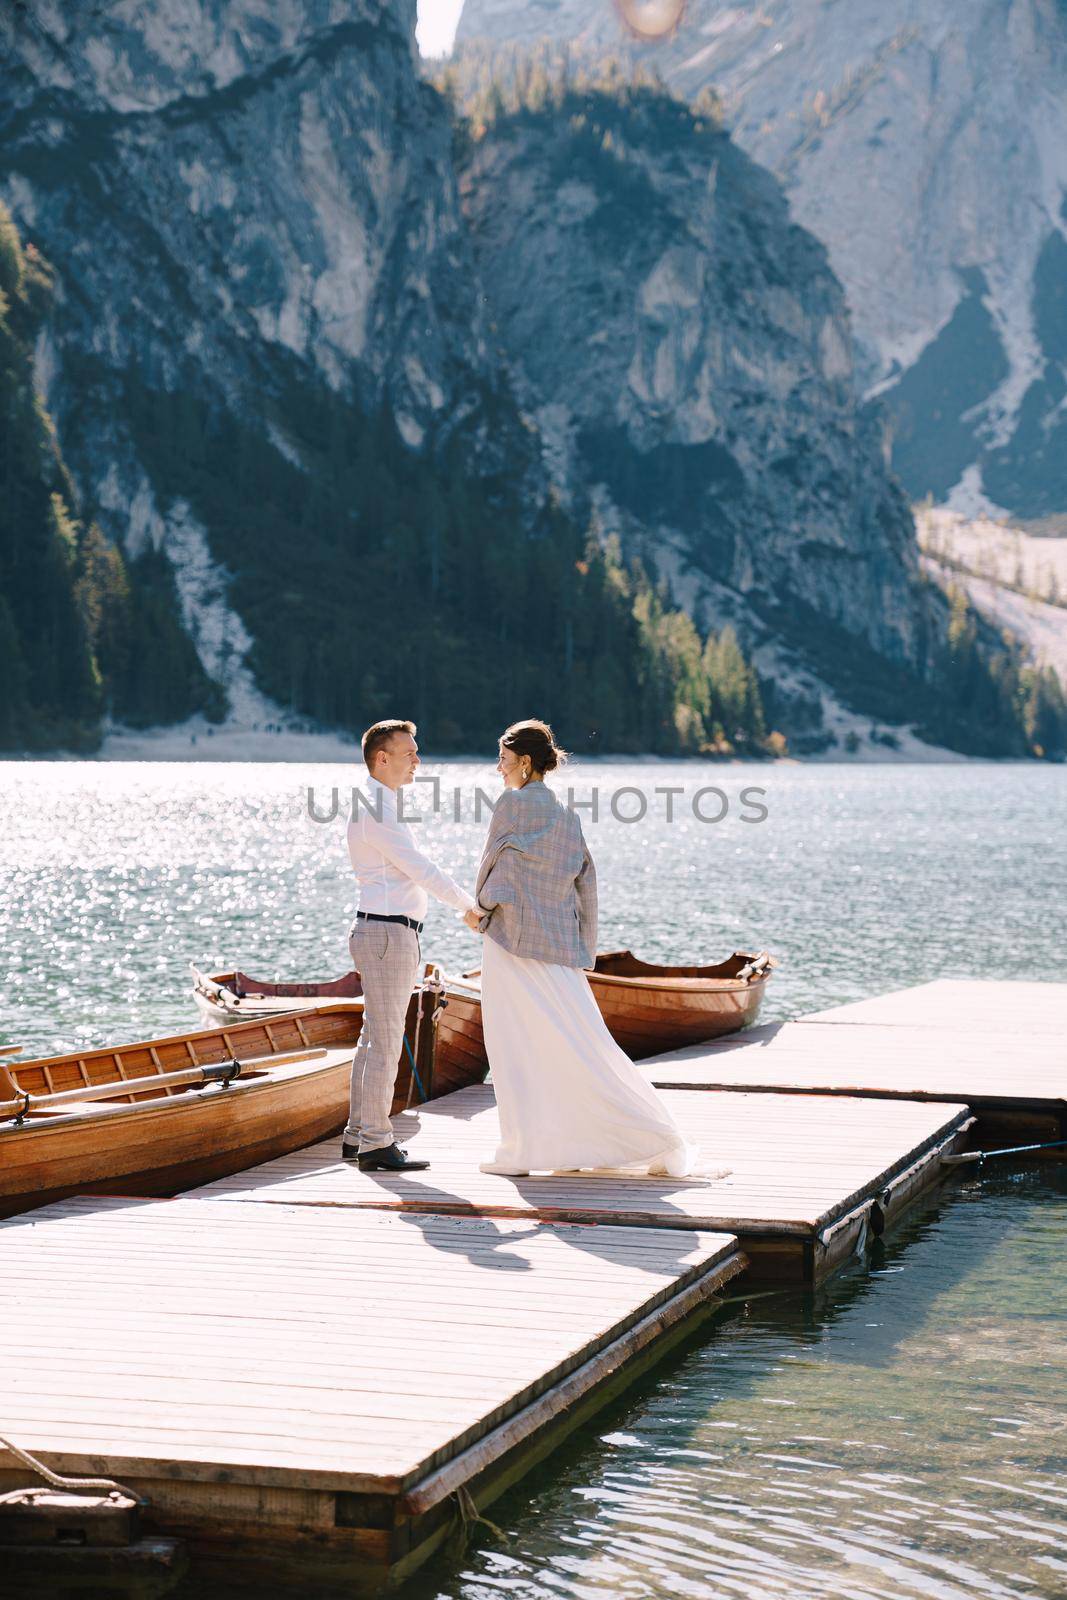 The bride and groom walk on a wooden boat dock at Lago di Braies in Italy. Wedding in Europe, at Braies lake. Newlyweds walk, kiss, cuddle against the backdrop of rocky mountains.